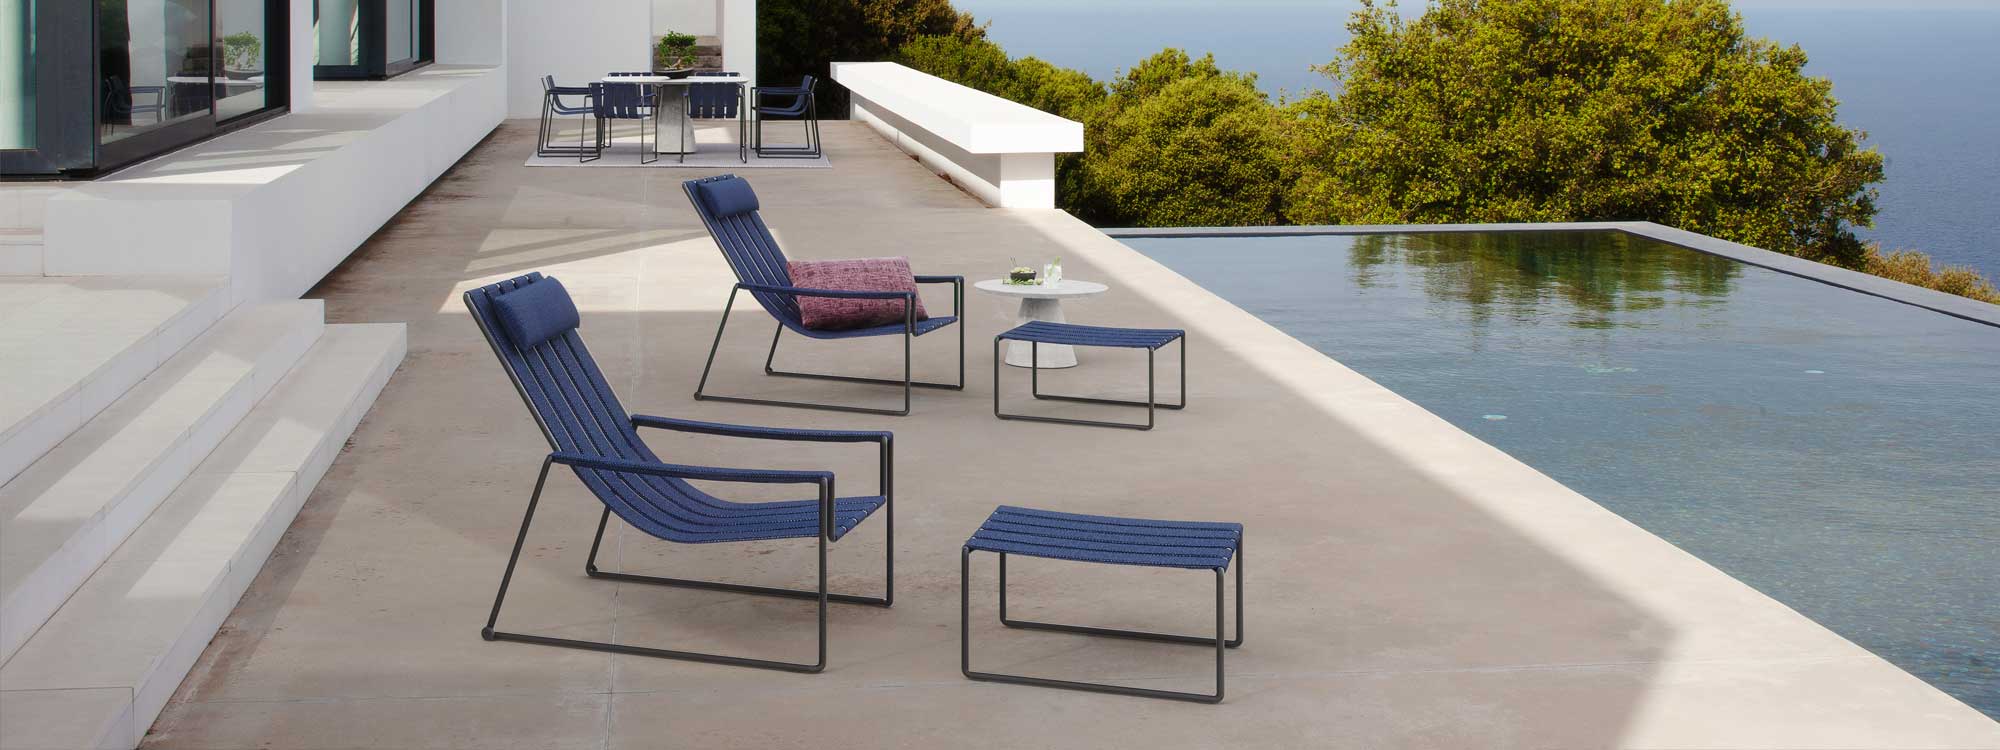 Strappy garden relax chair is a minimalist outdoor lounge chair and footstool in quality garden furniture materials by Royal Botania furniture